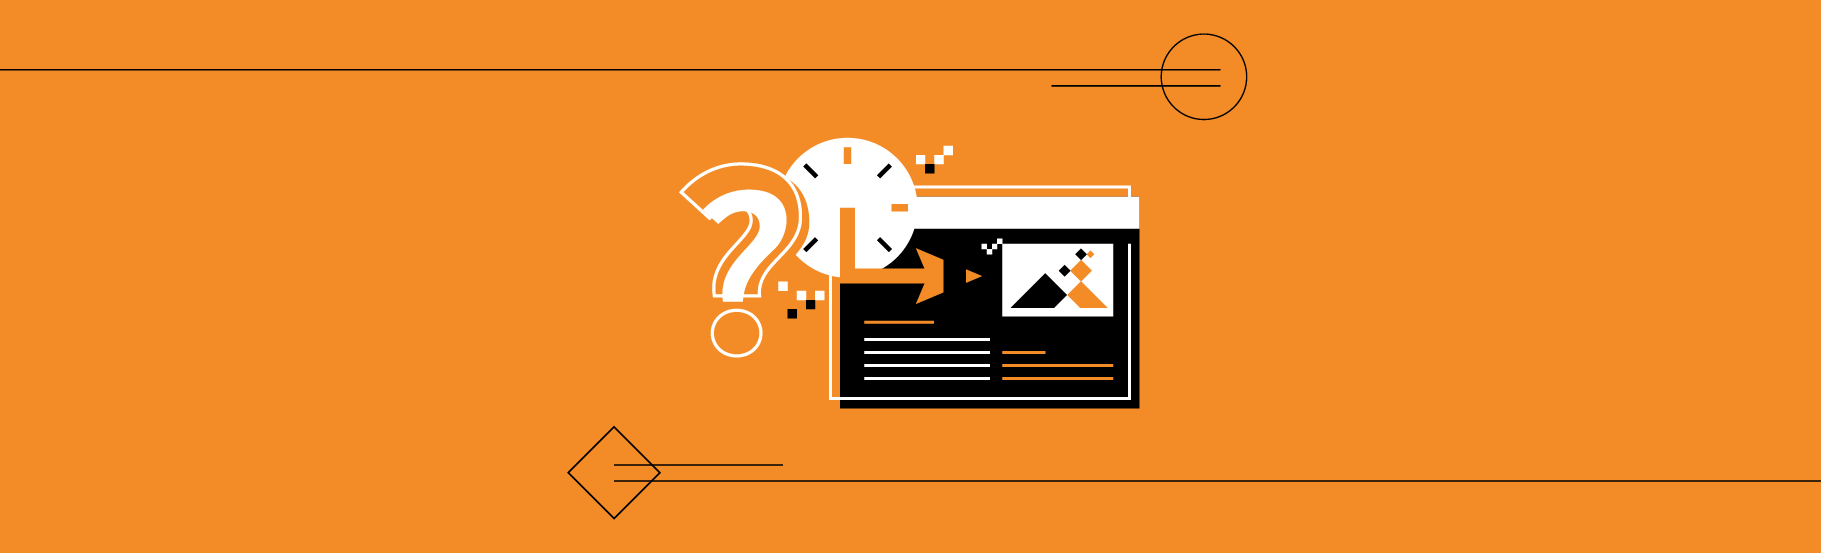 How do you know it’s the right time for a website redesign?